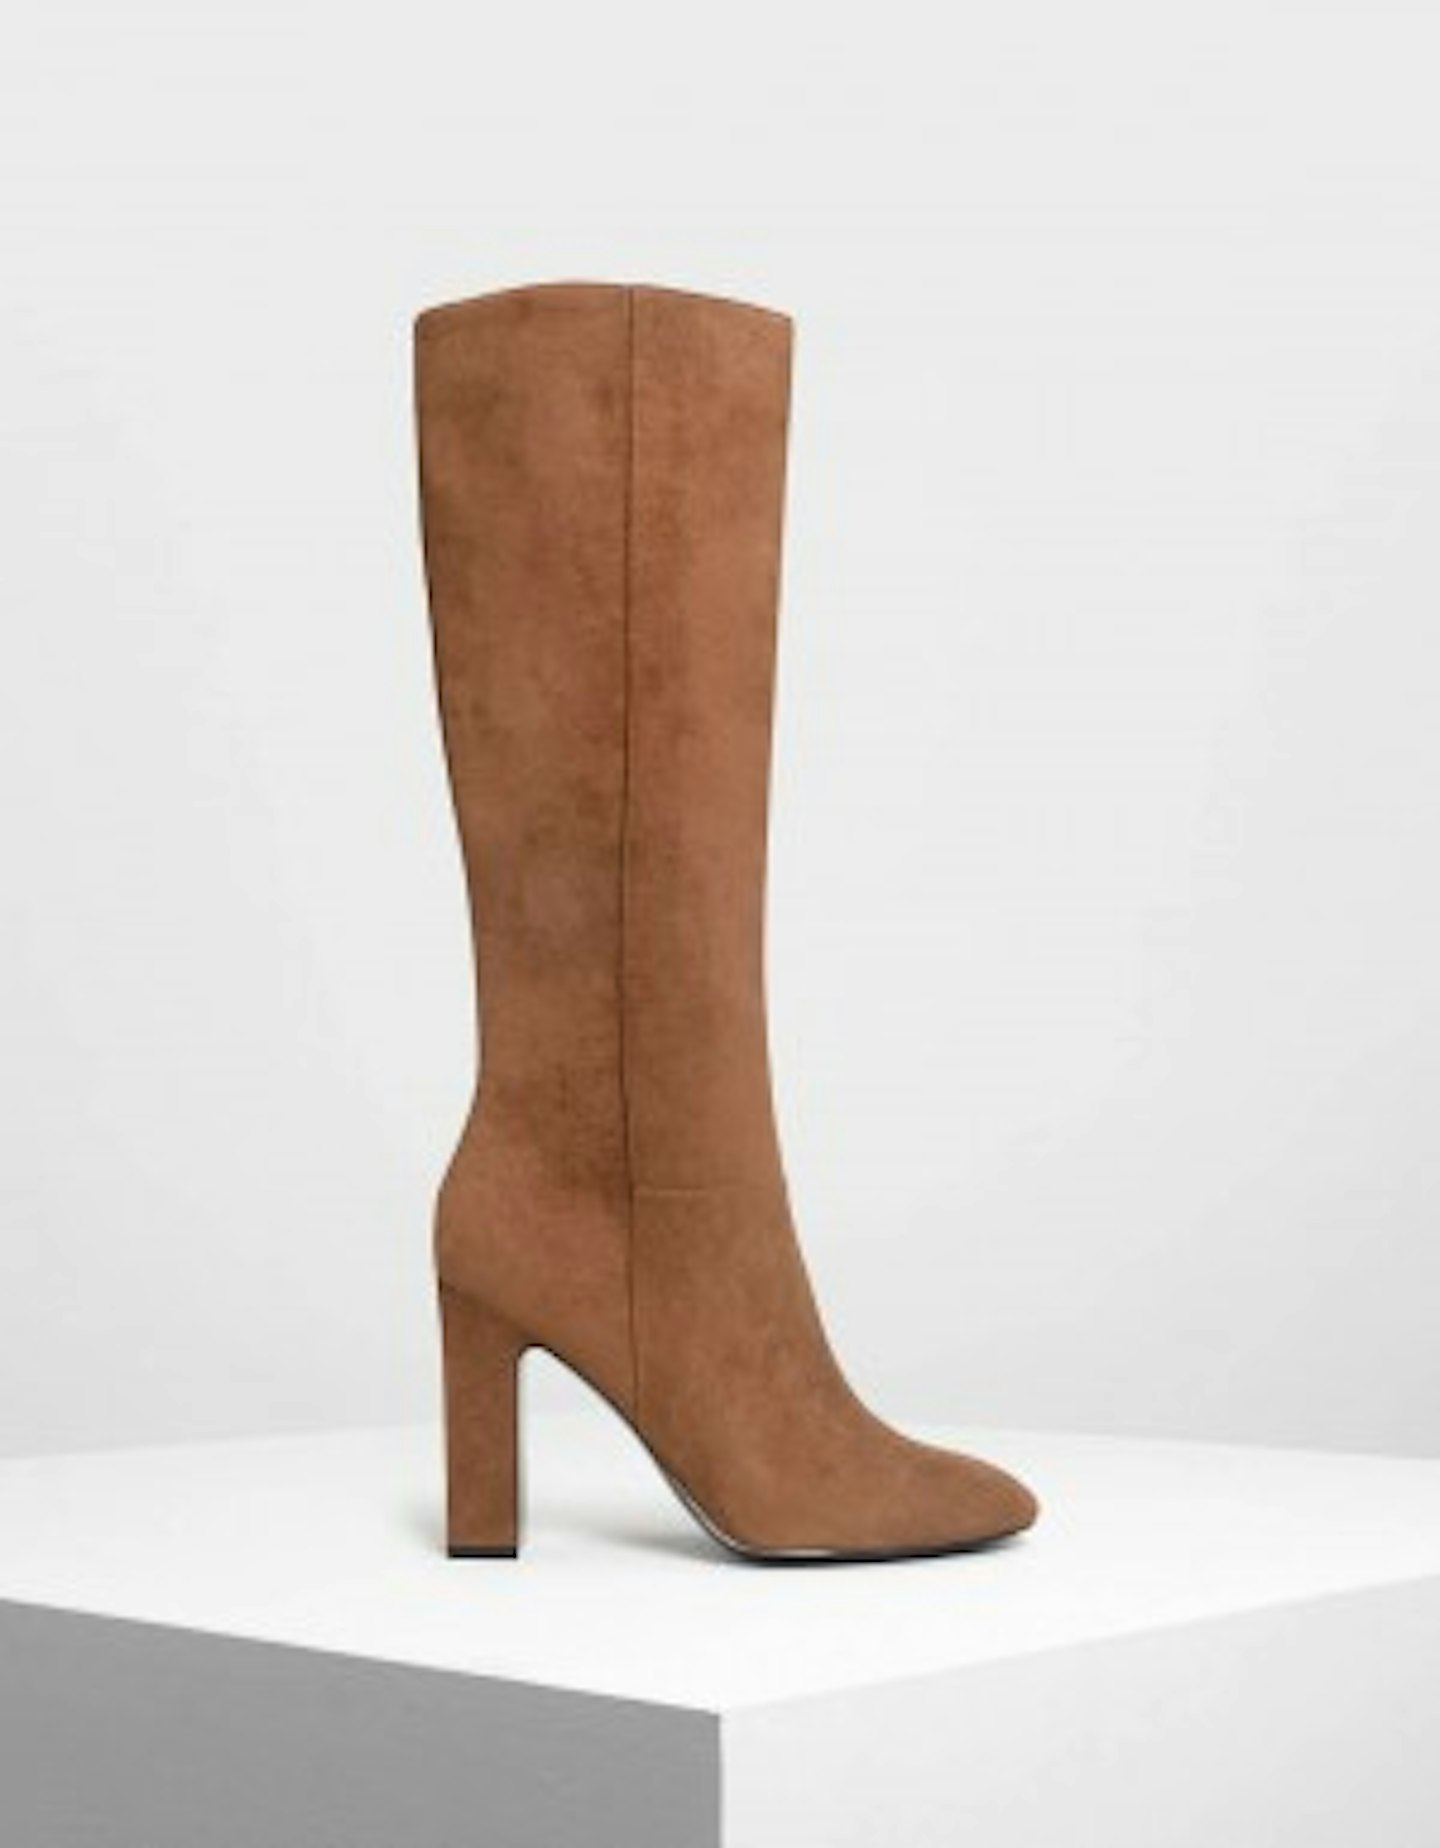 Charles & Keith, Classic Knee Boots, £89